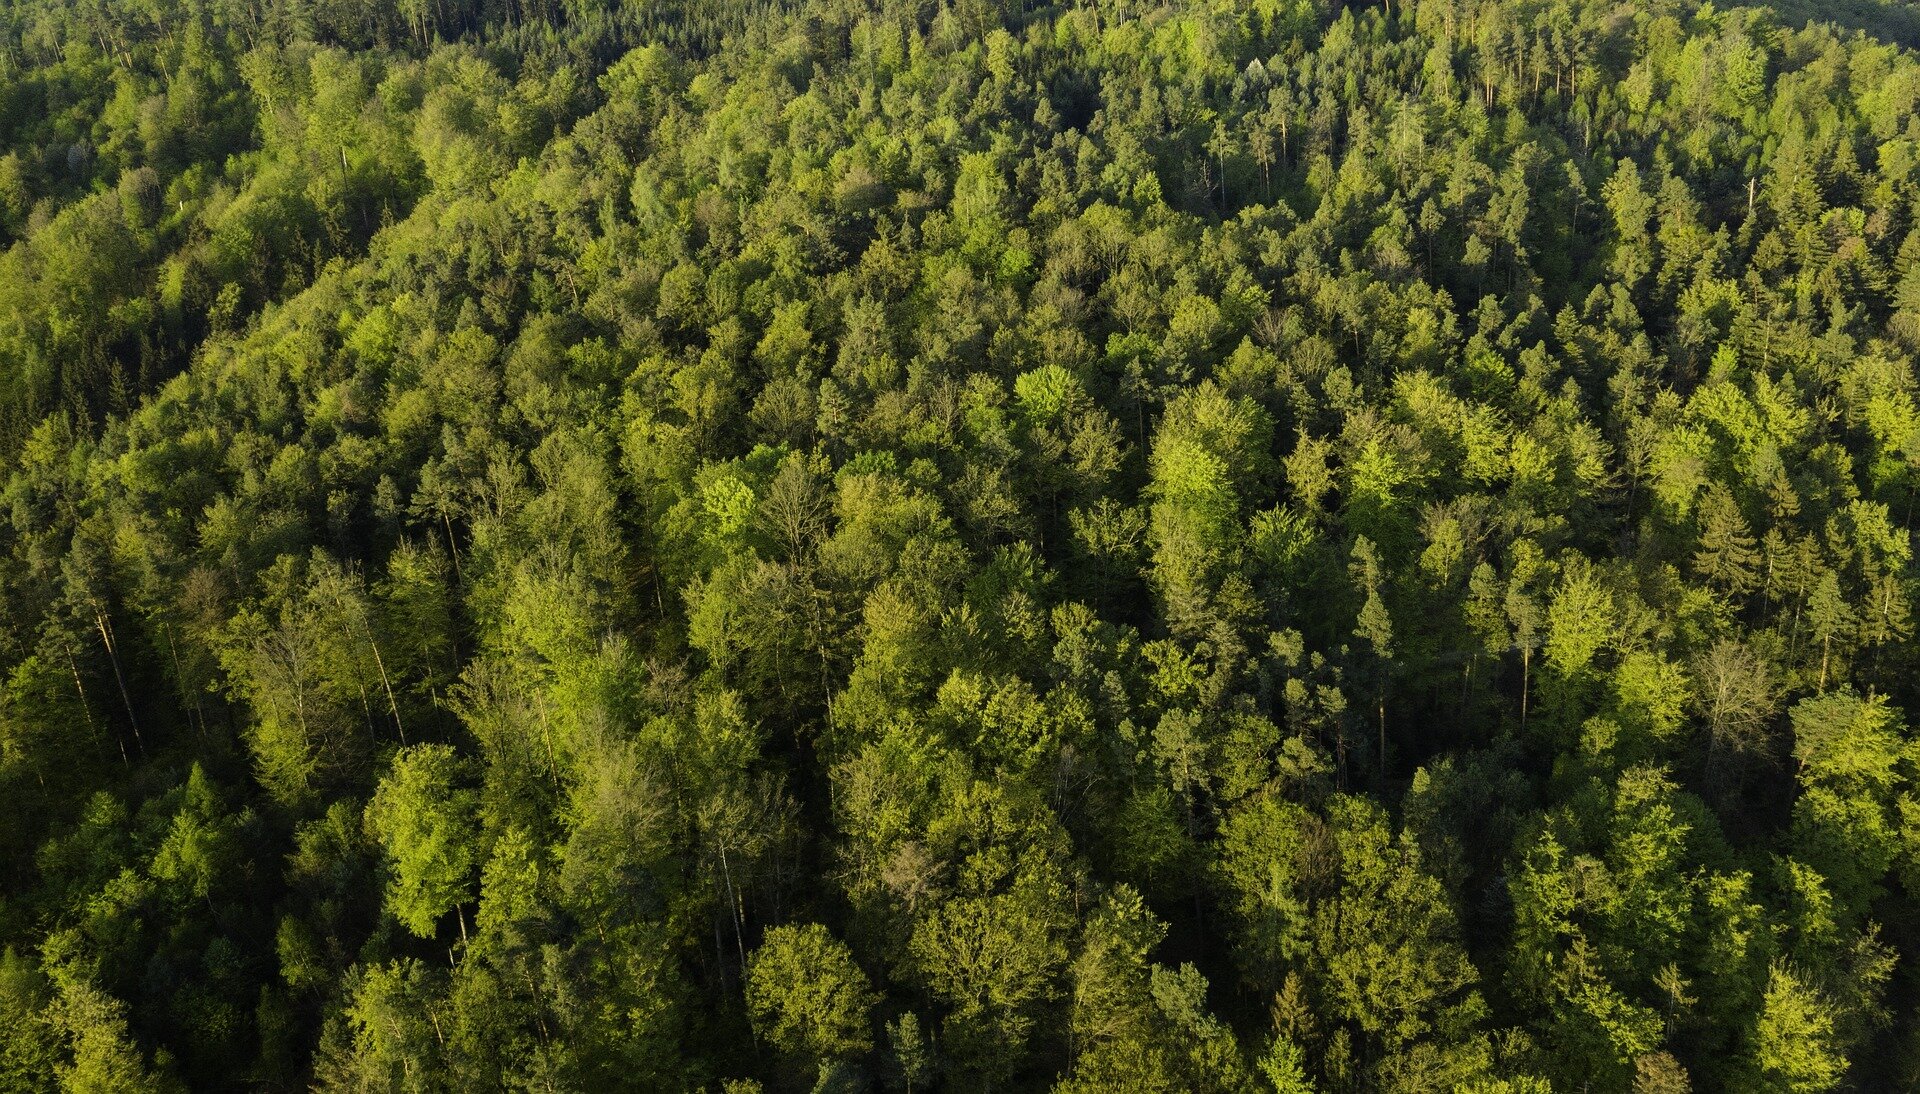 Side-effects of expanding forests could limit their potential to tackle climate change—new study